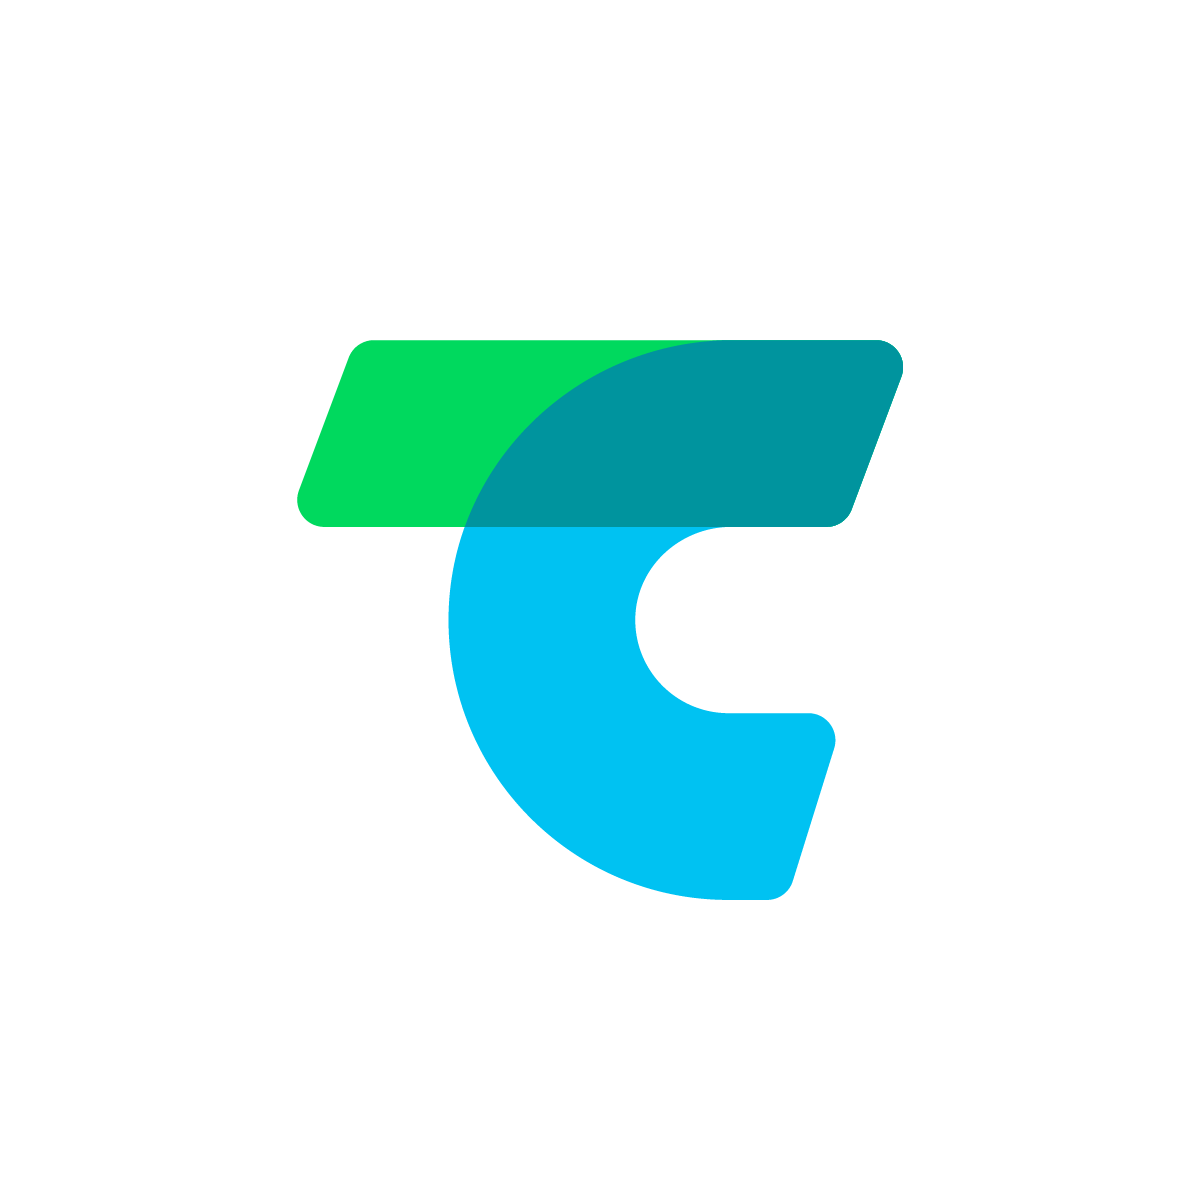 TC Logo seamlessly combines 'T' and 'C' in an overlap, representing harmony, collaboration, and shared vision